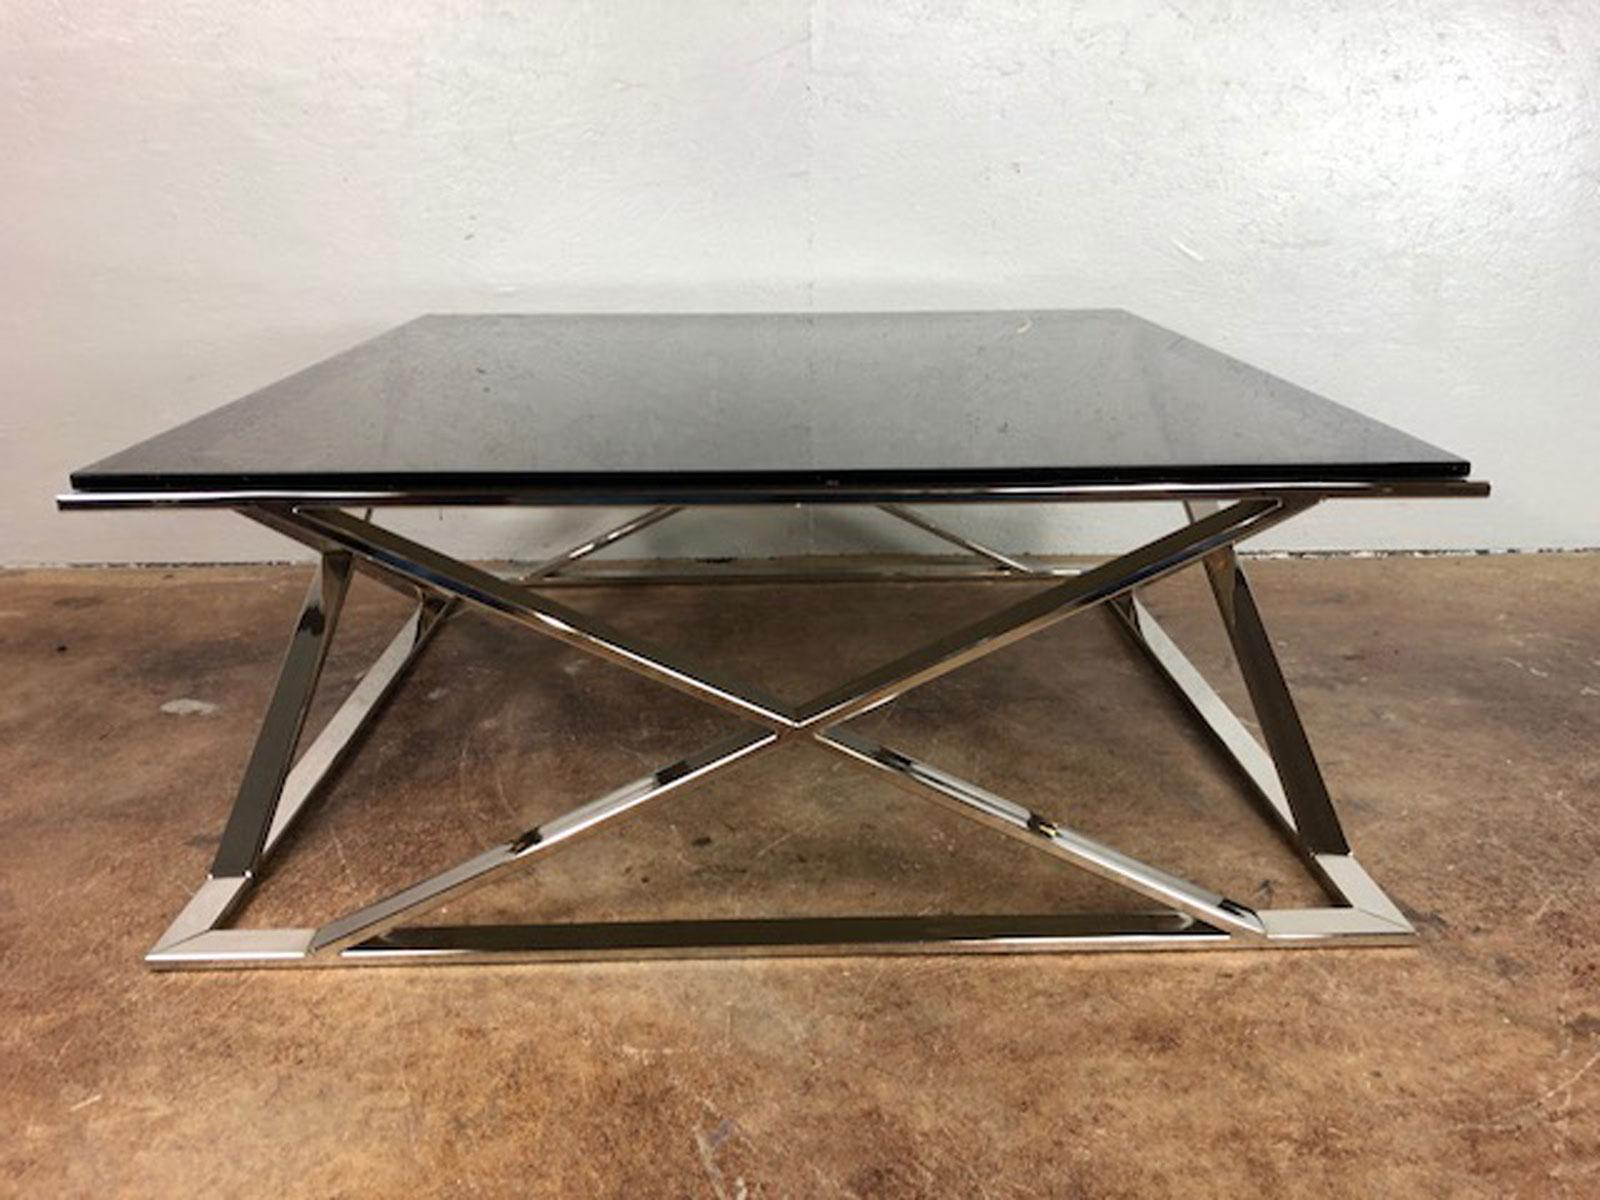 Milo Baughman polished stainless steel and glass coffee table. Superb look. Polished stainless is in very good condition. Original smoked glass top is fully intact. The glass has one postage stamp sized imperfection 